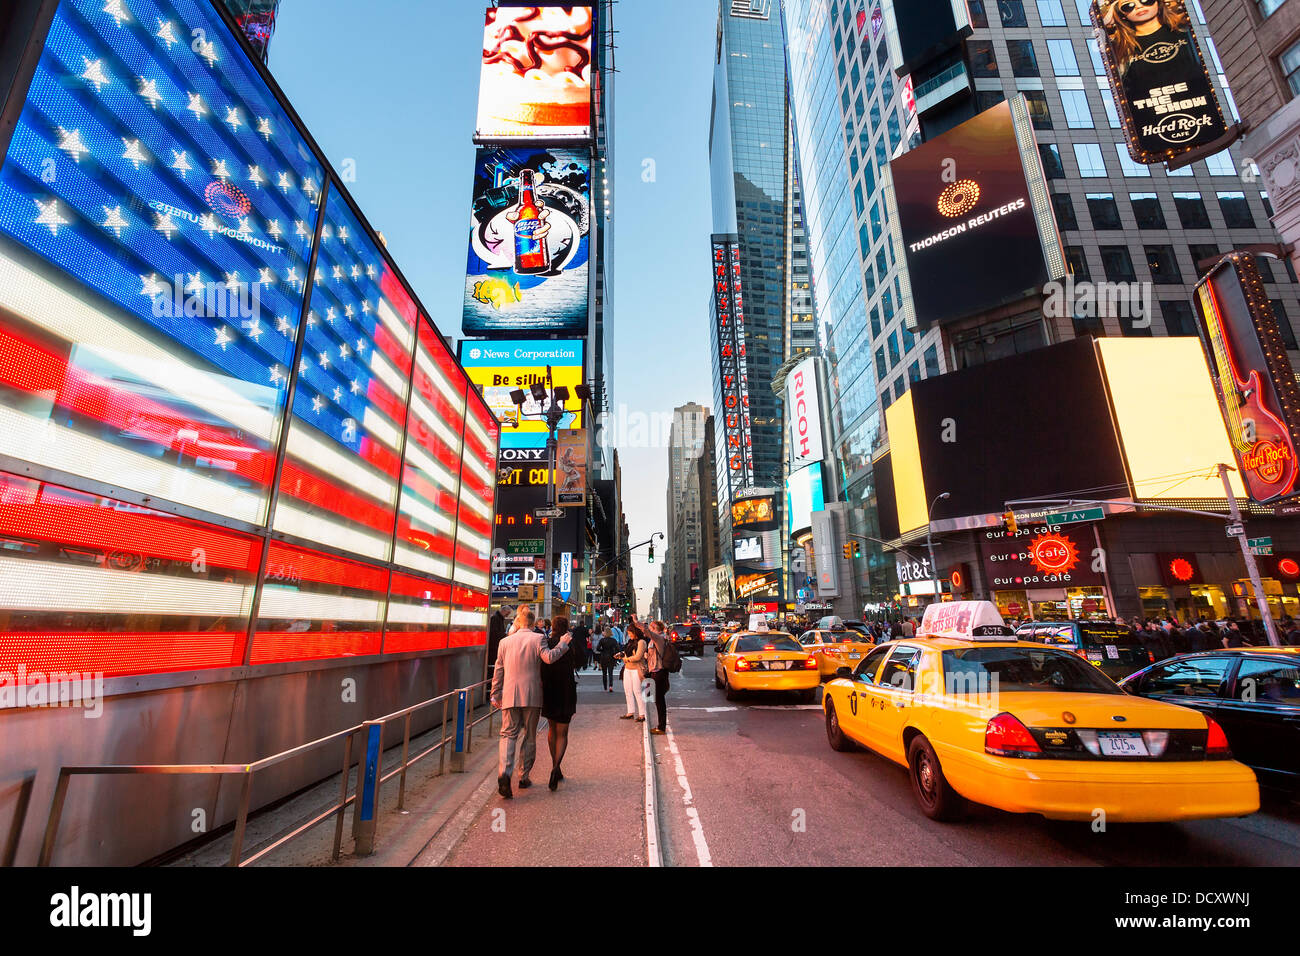 New York City, Times Square at Dusk Stock Photo